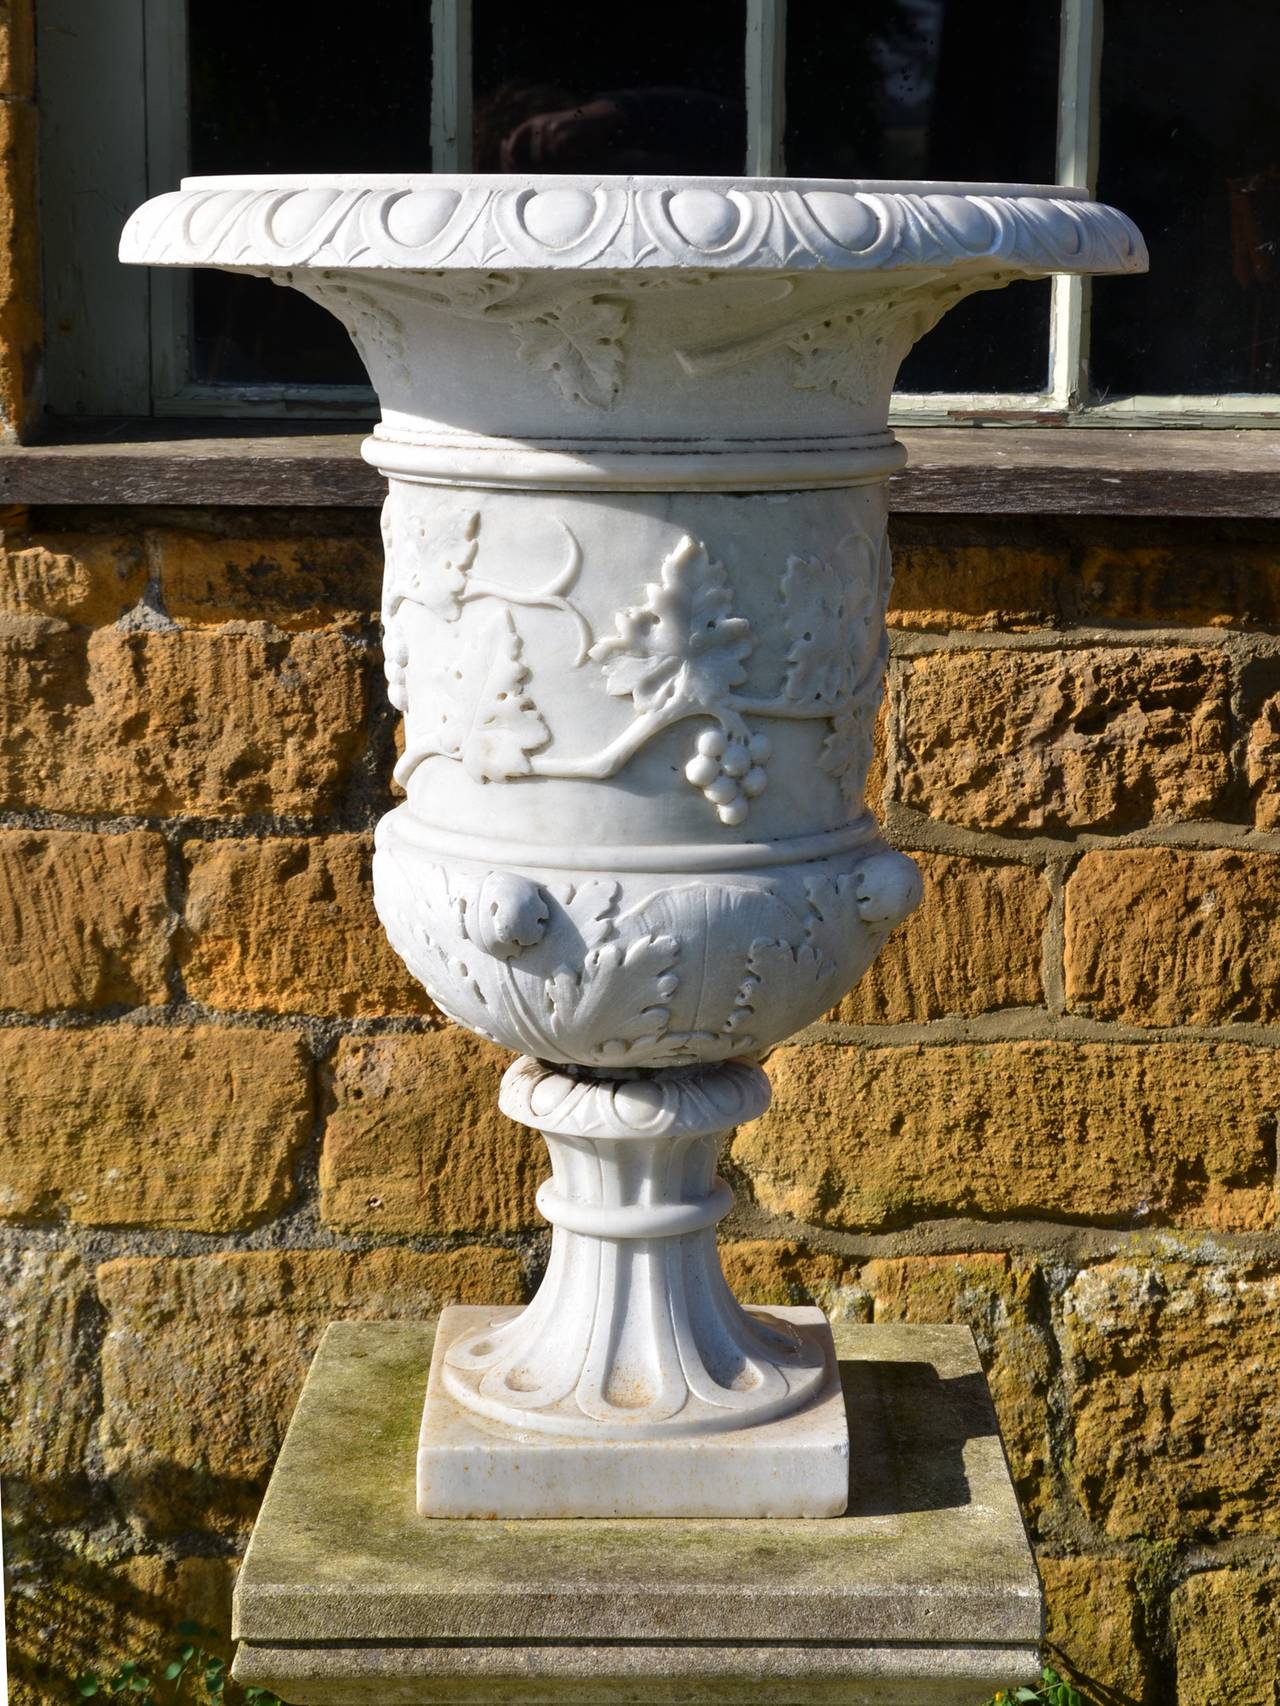 The main body of the urn having vine and grape embellishment, this pattern continuing under the rim with the top of the rim being carved with an egg and dart motif. The urn base has acanthus leaf decoration raised upon a fluted socle.